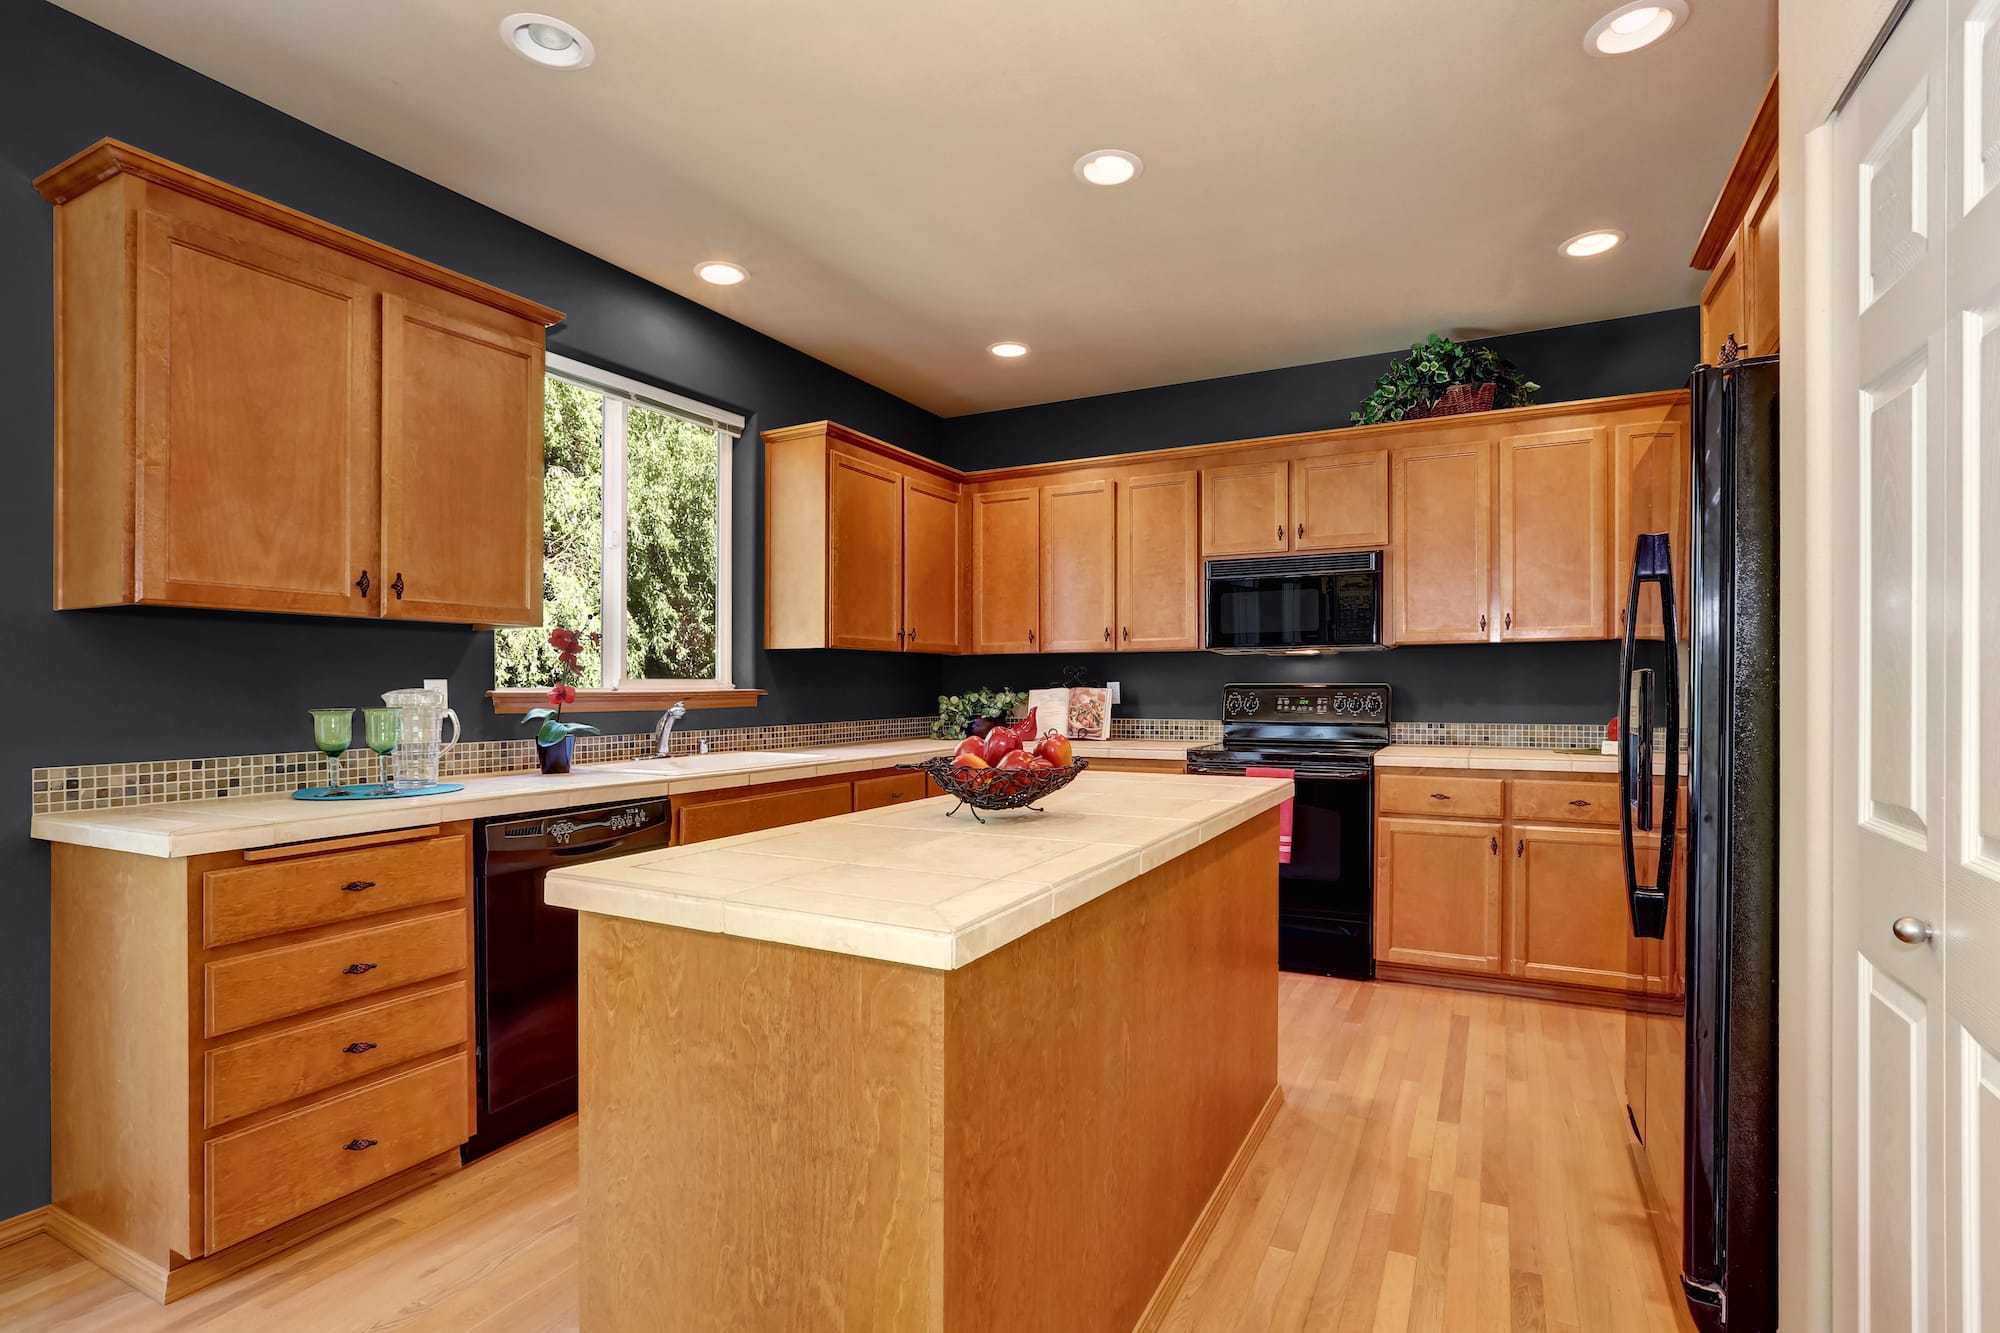 Paint Colors That Go With Honey Oak, What Color Walls With Honey Oak Cabinets